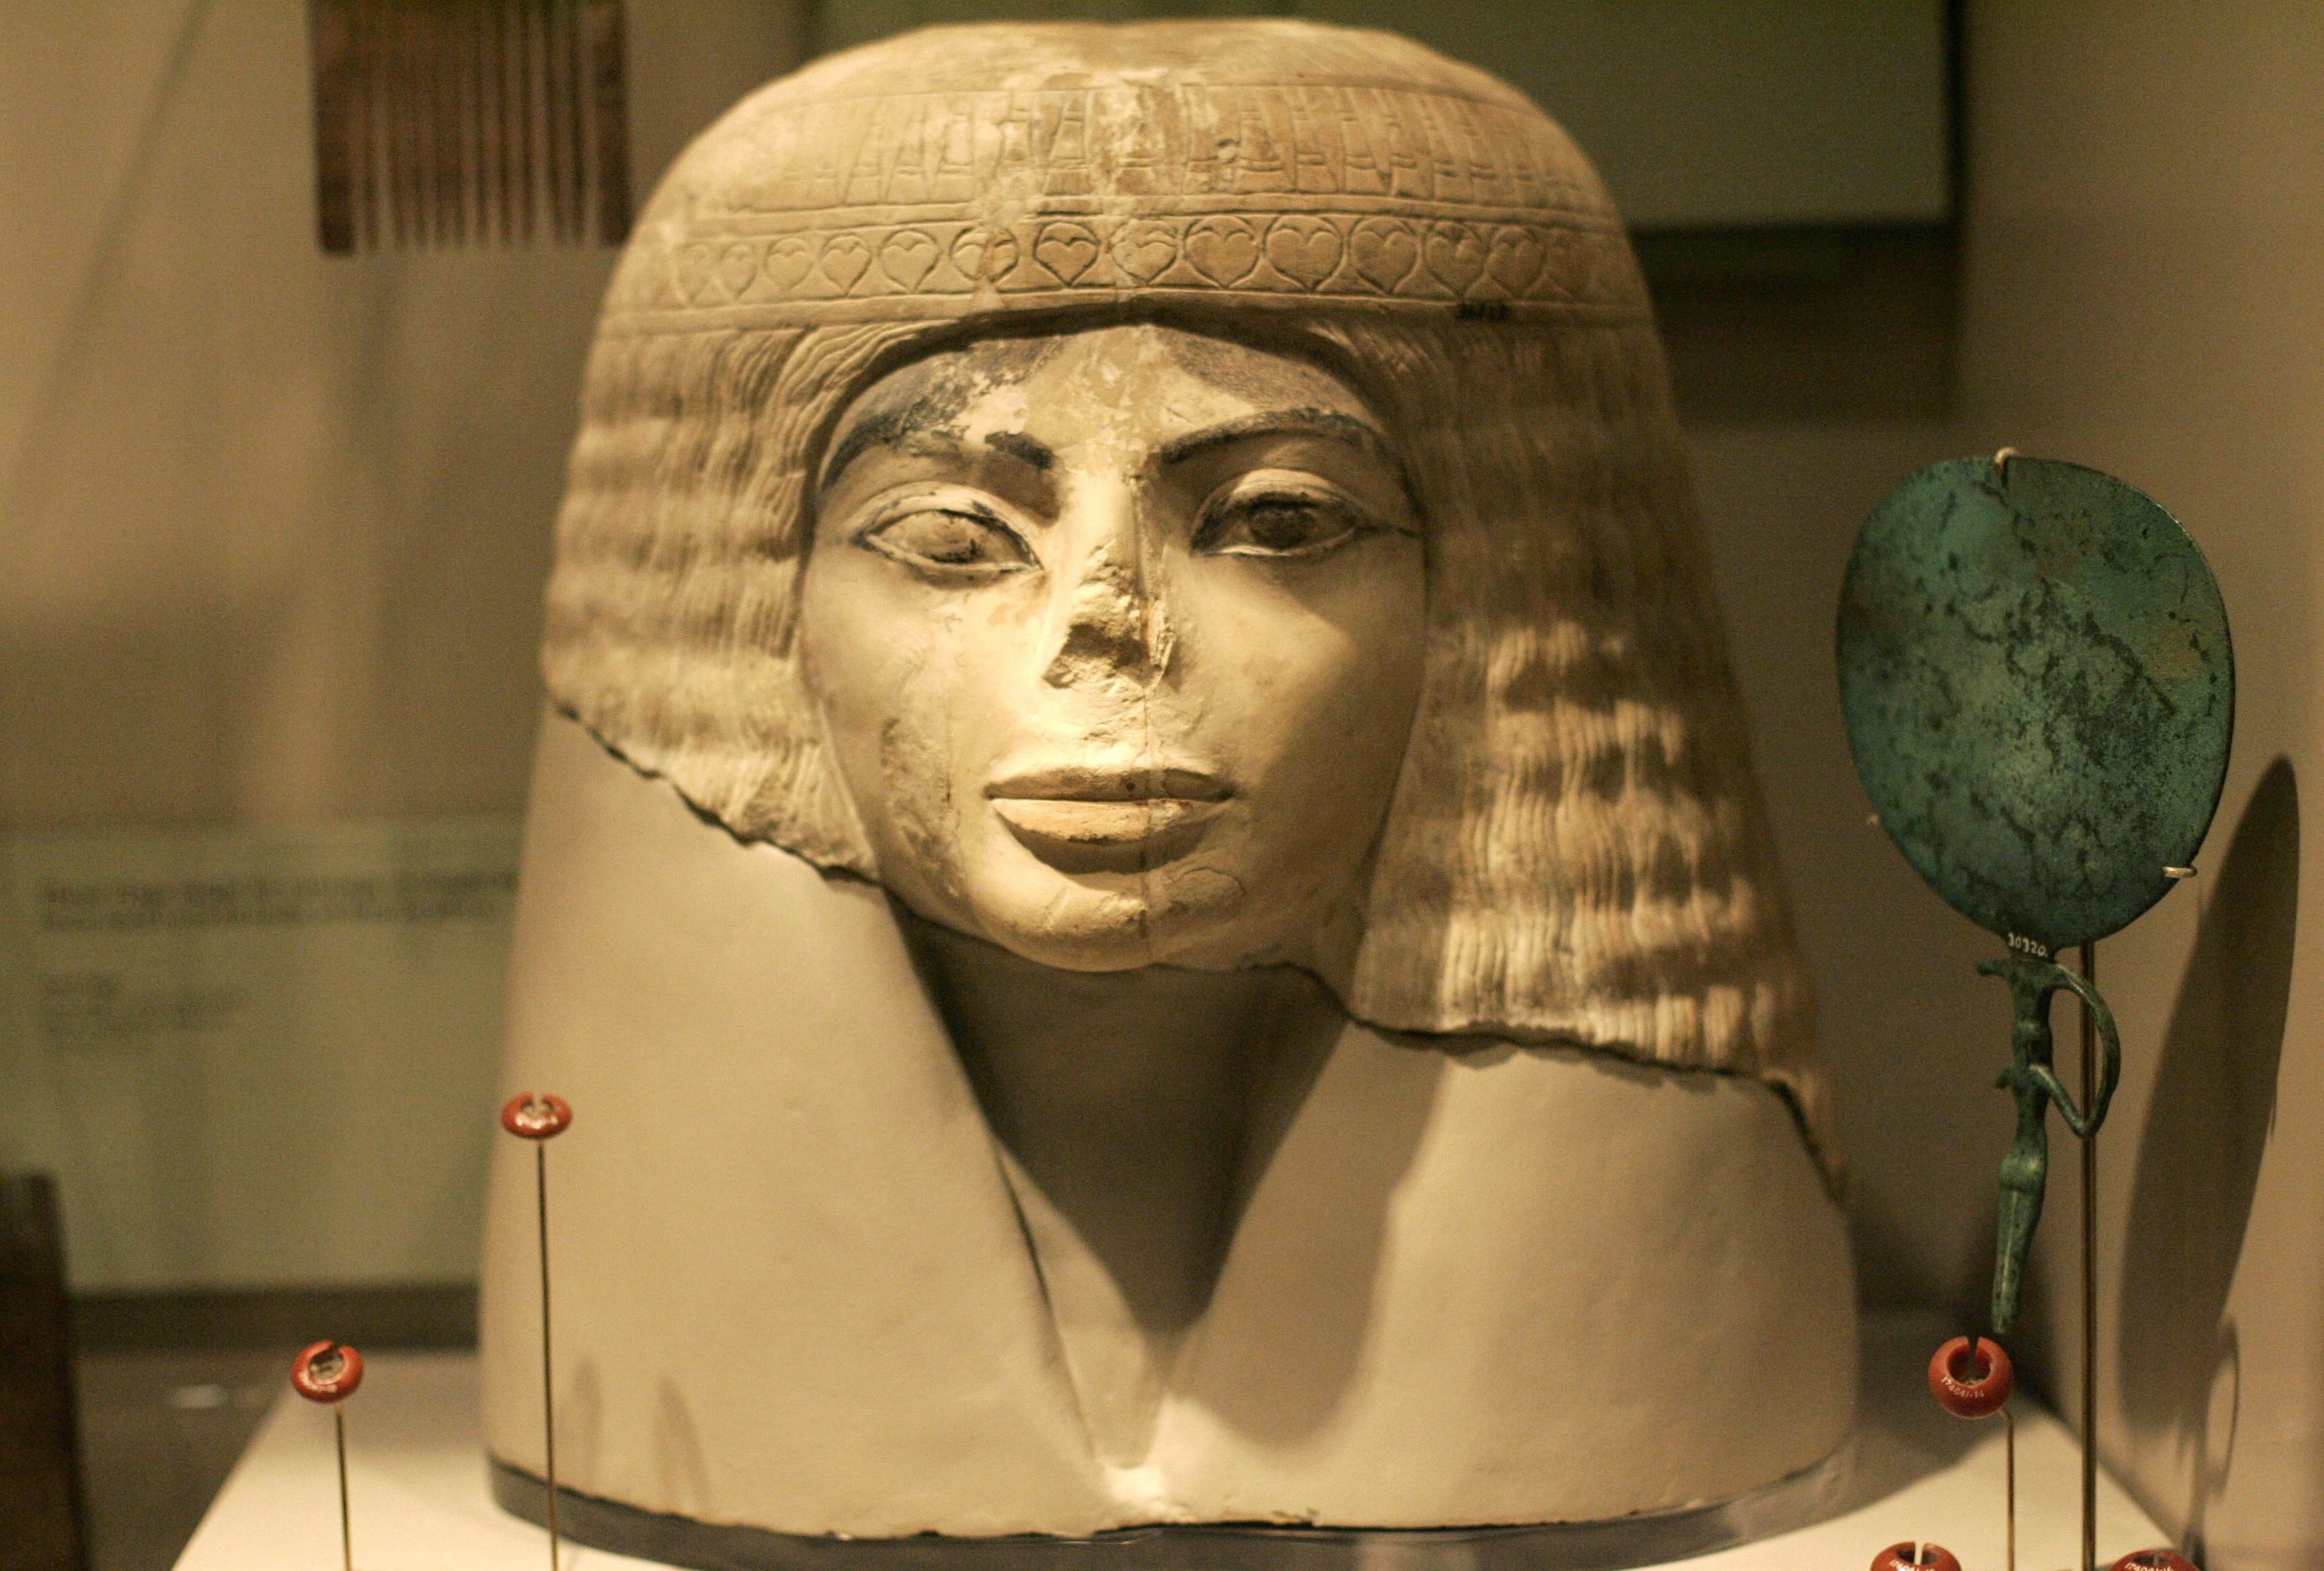 The head of an Egyptian statue with a damaged nose and large eyes with eyeliner